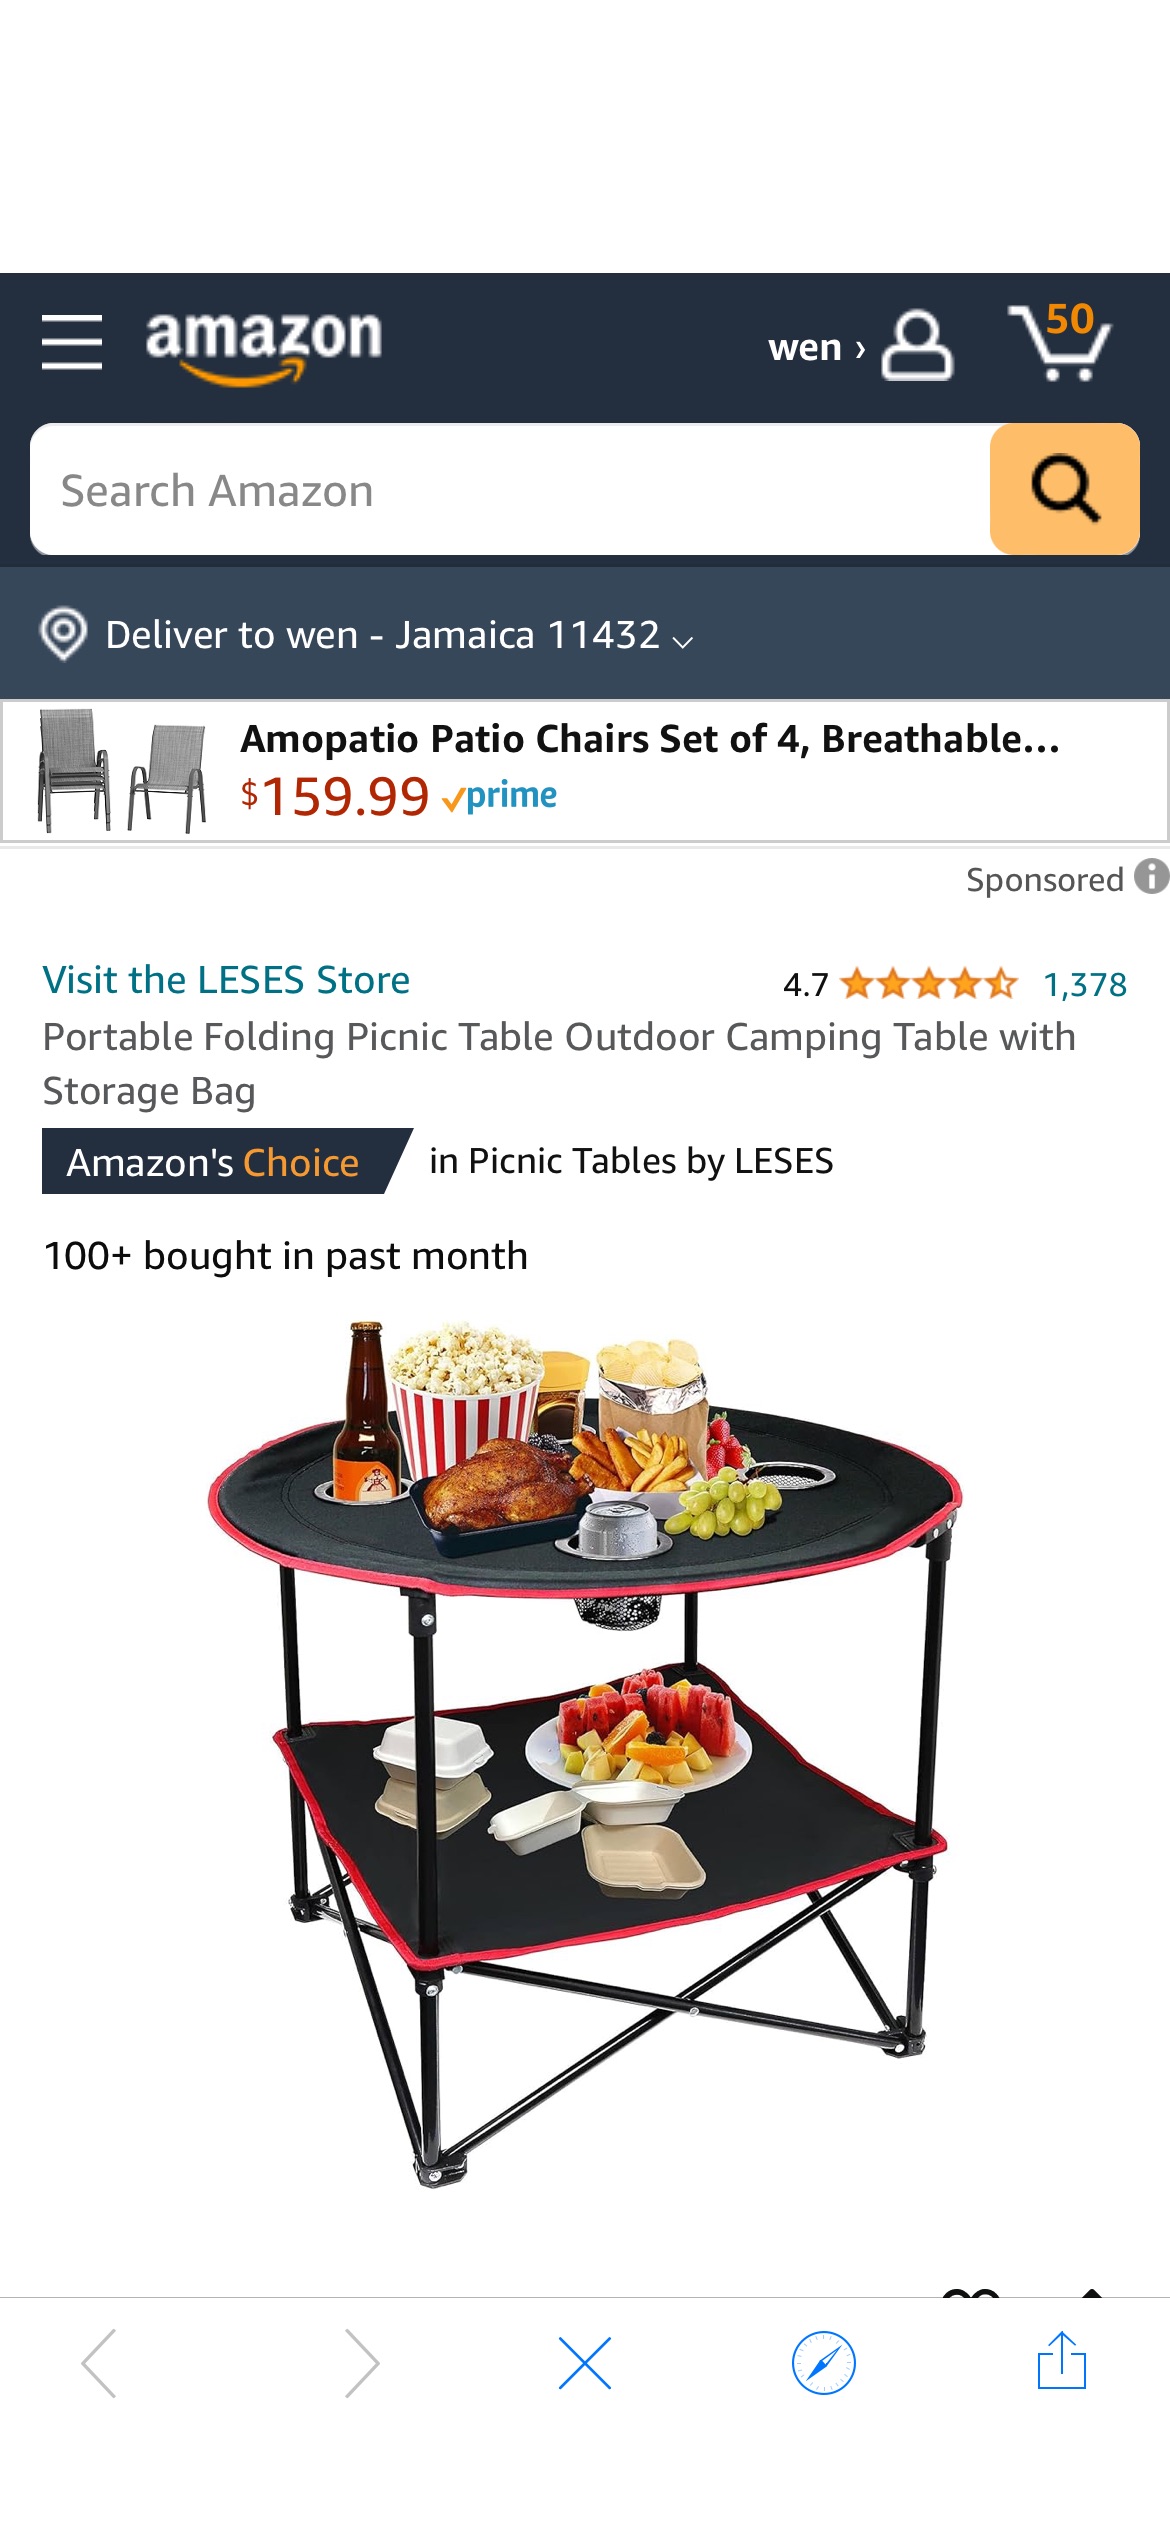 Amazon.com: LESES Portable Folding Picnic Table Outdoor Camping Table with Storage Bag : Patio, Lawn & Garden